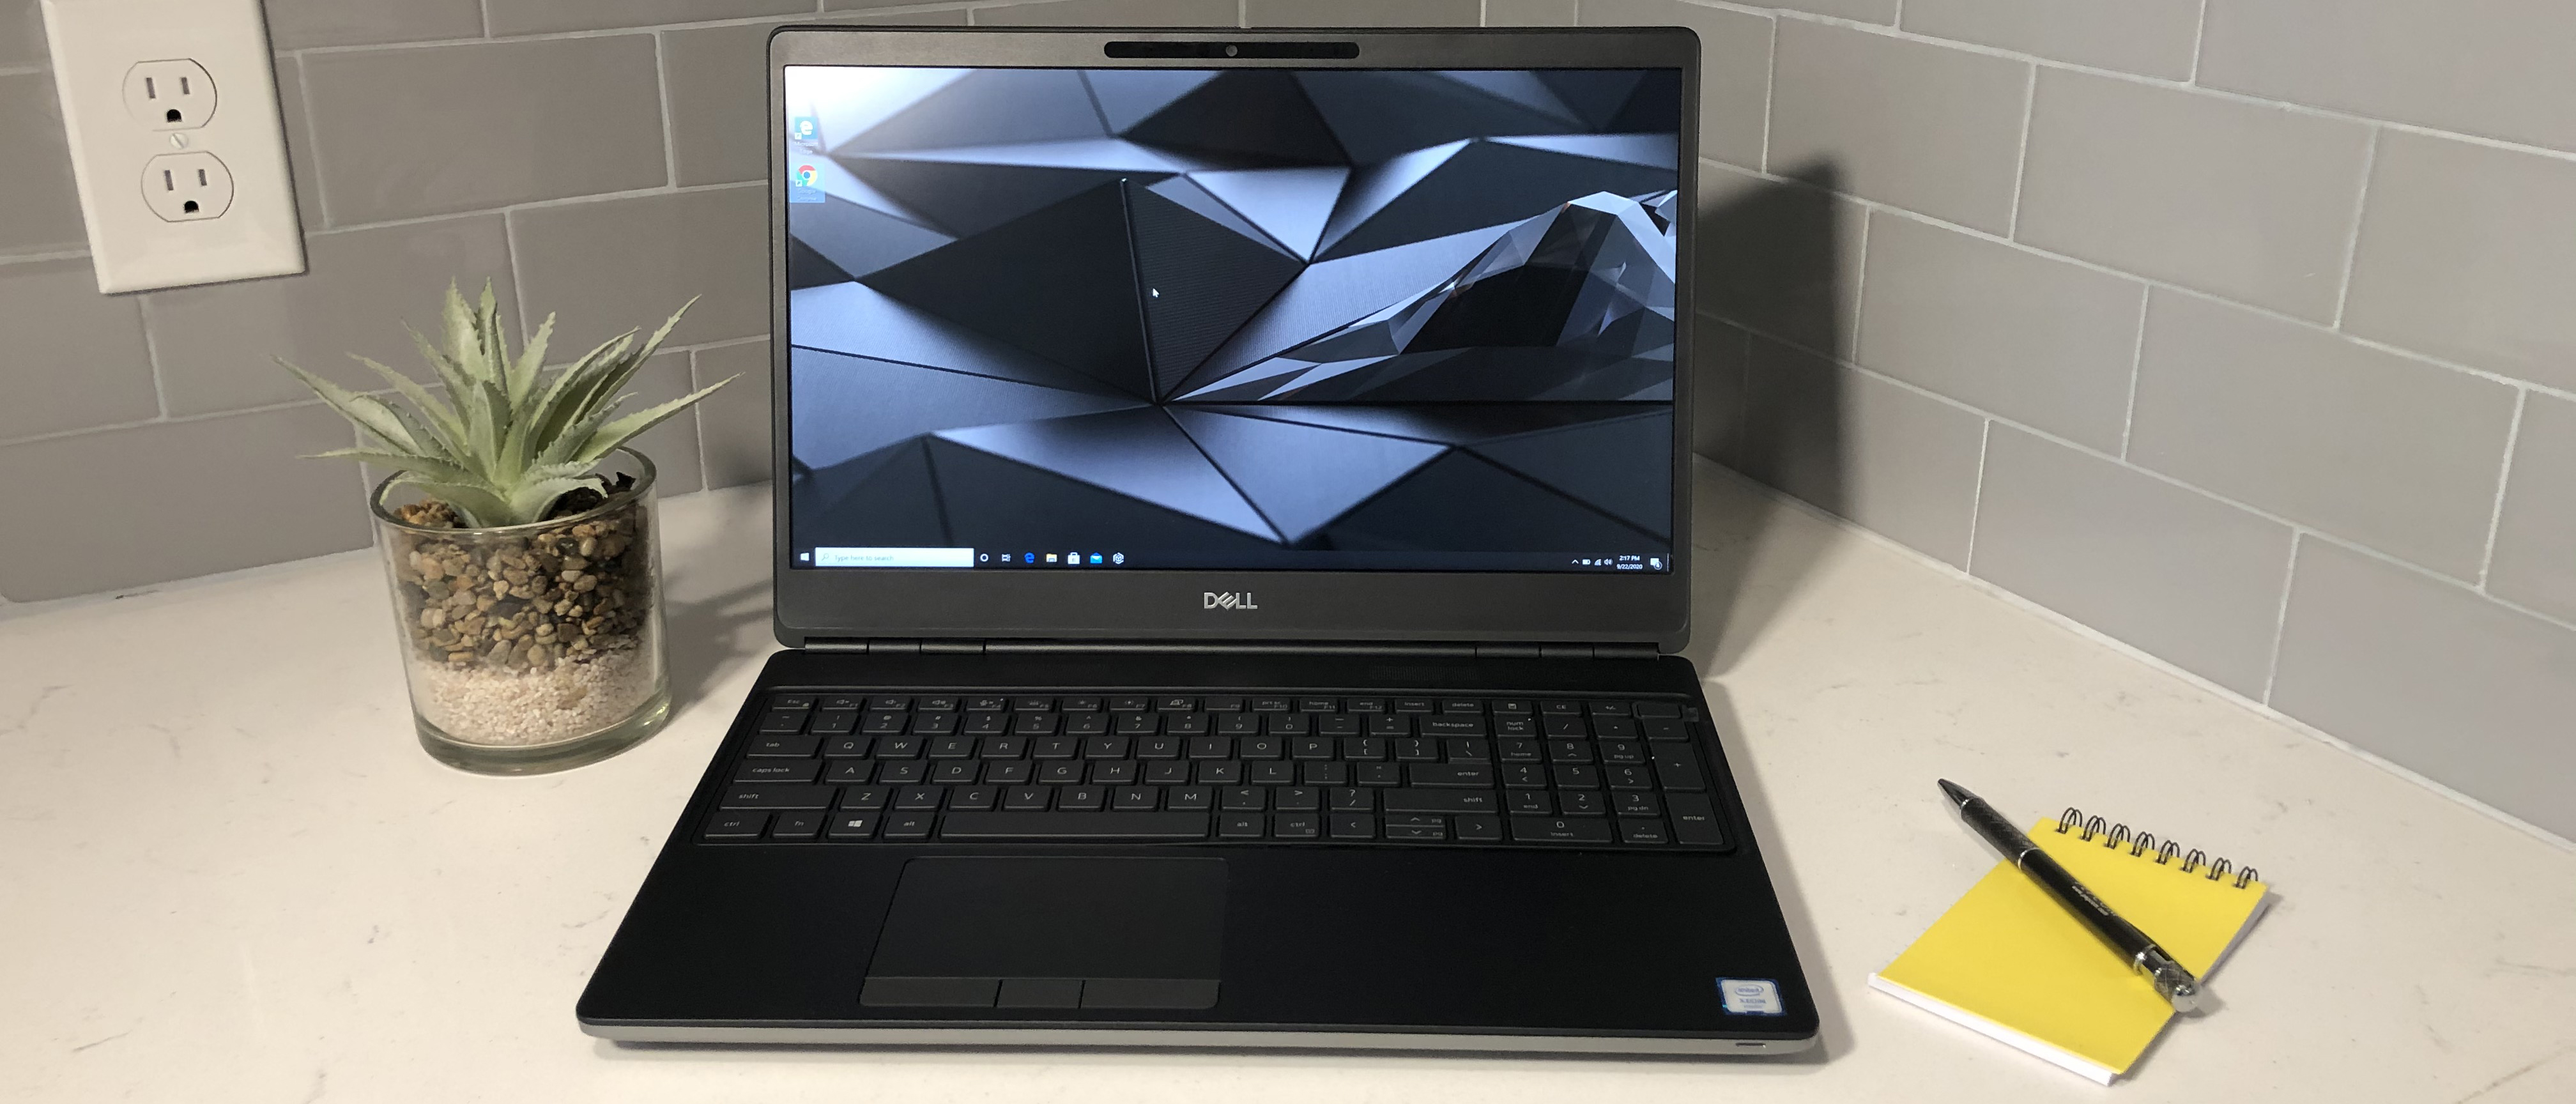 Dell Precision 7550 review | Laptop Mag